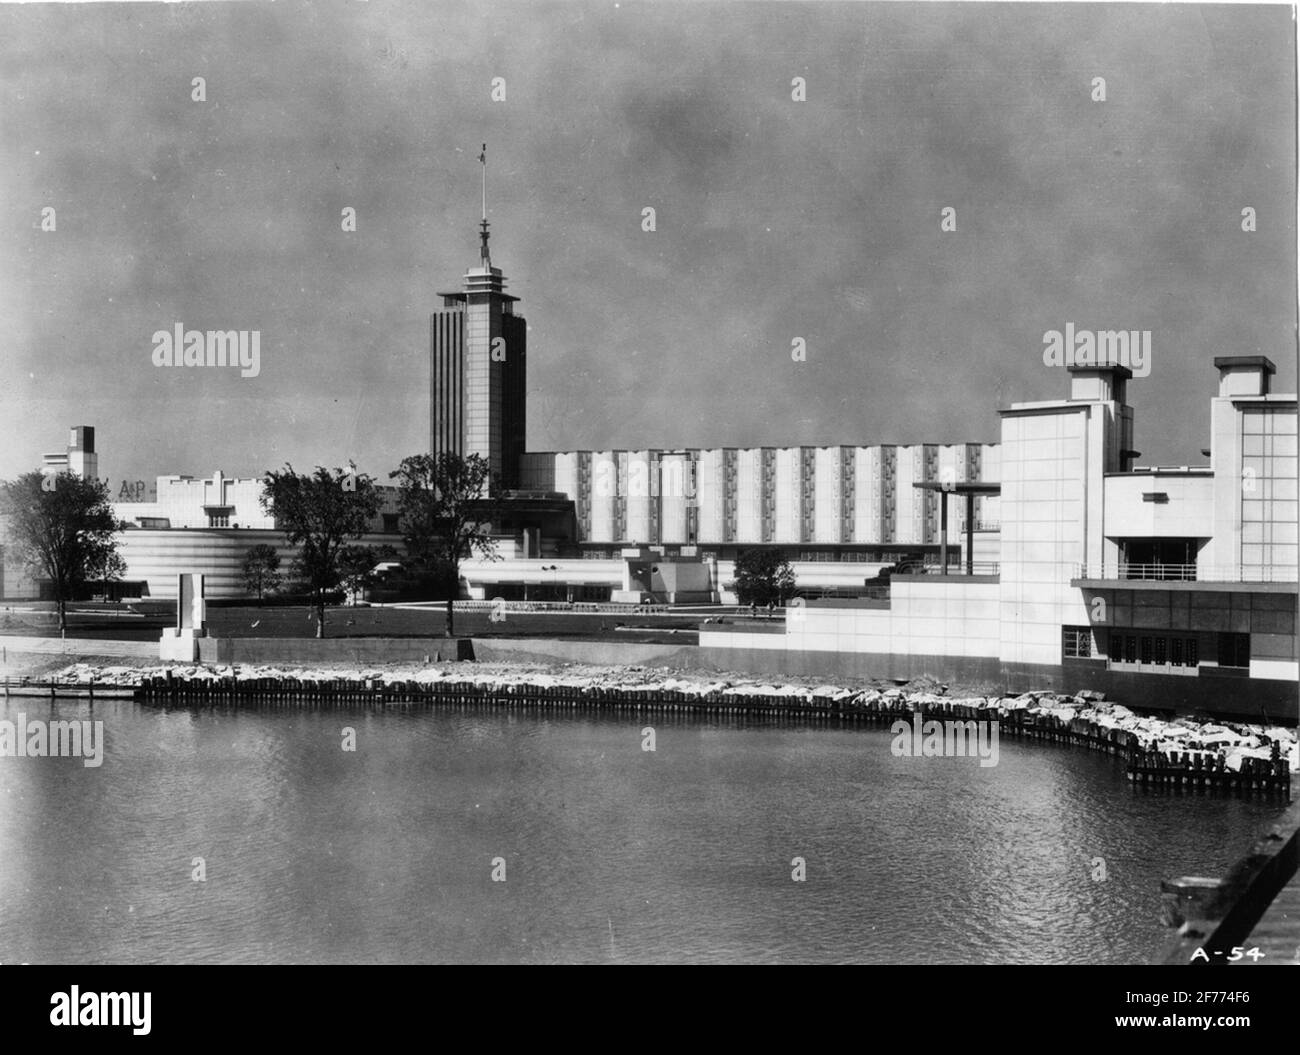 World exhibition in Chicago in 1933. The exhibition hall, where the development of modern science during a decenium was shown. This immense building, 700 x 400 feet, with the shape of a U enclosed on three sides of a farm, holding 80,000 people. In one corner a 176 foot high tower. On the front of the building a week lagoon and beyond an island and Lake Michigan. At night, a glint of the brilliant illuminated metal and glass, traveling over color shifting terraces. Stock Photo